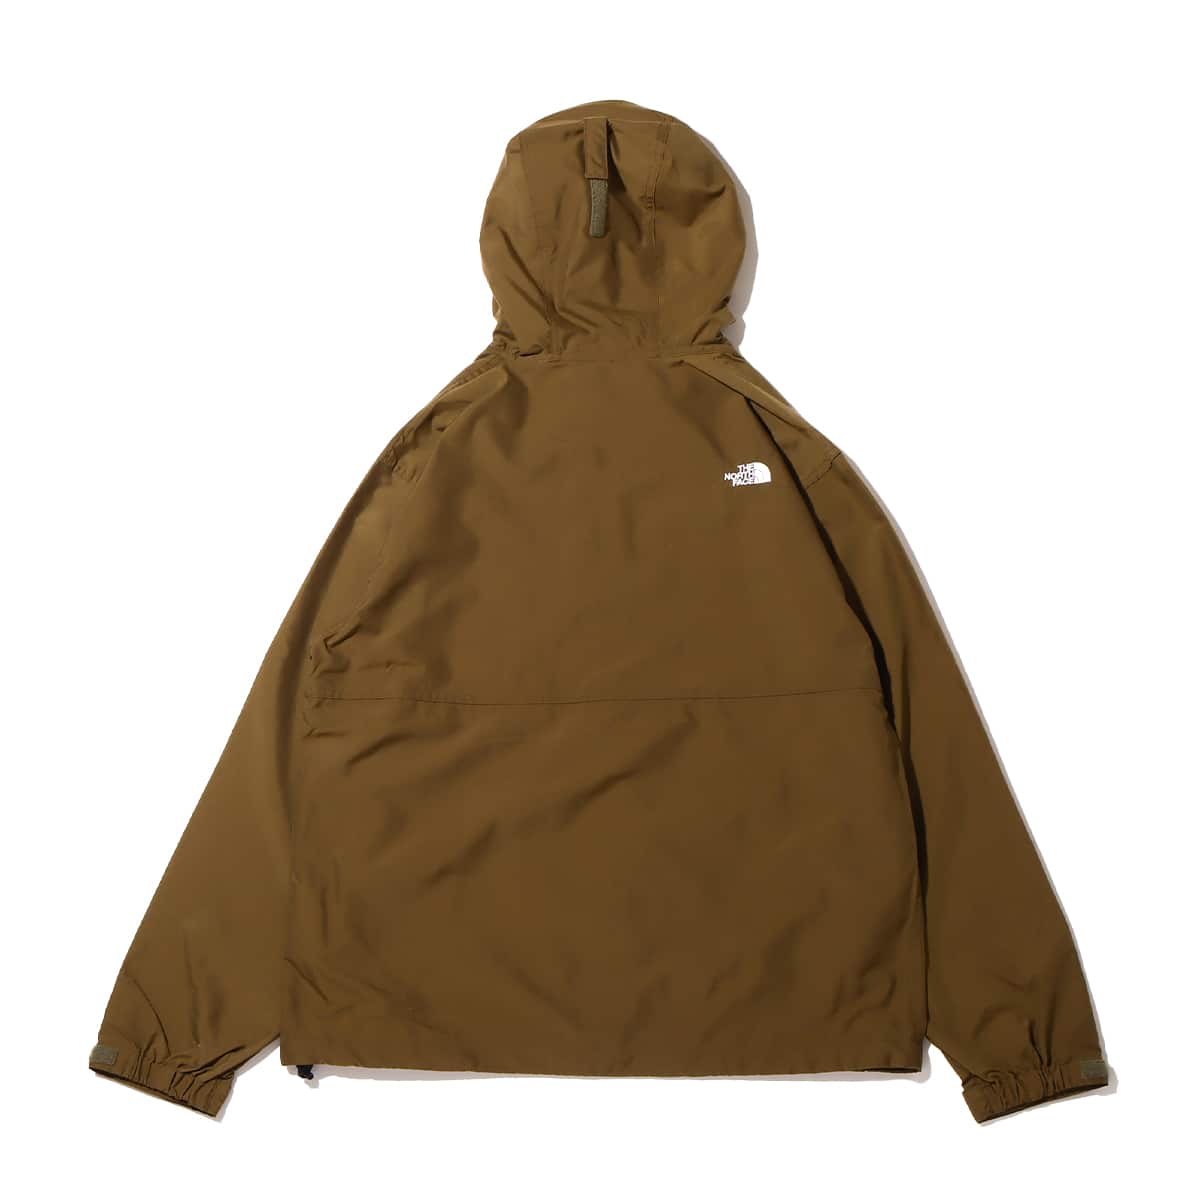 THE NORTH FACE COMPACT JACKET ミリタリーオリーブ 22FW-I